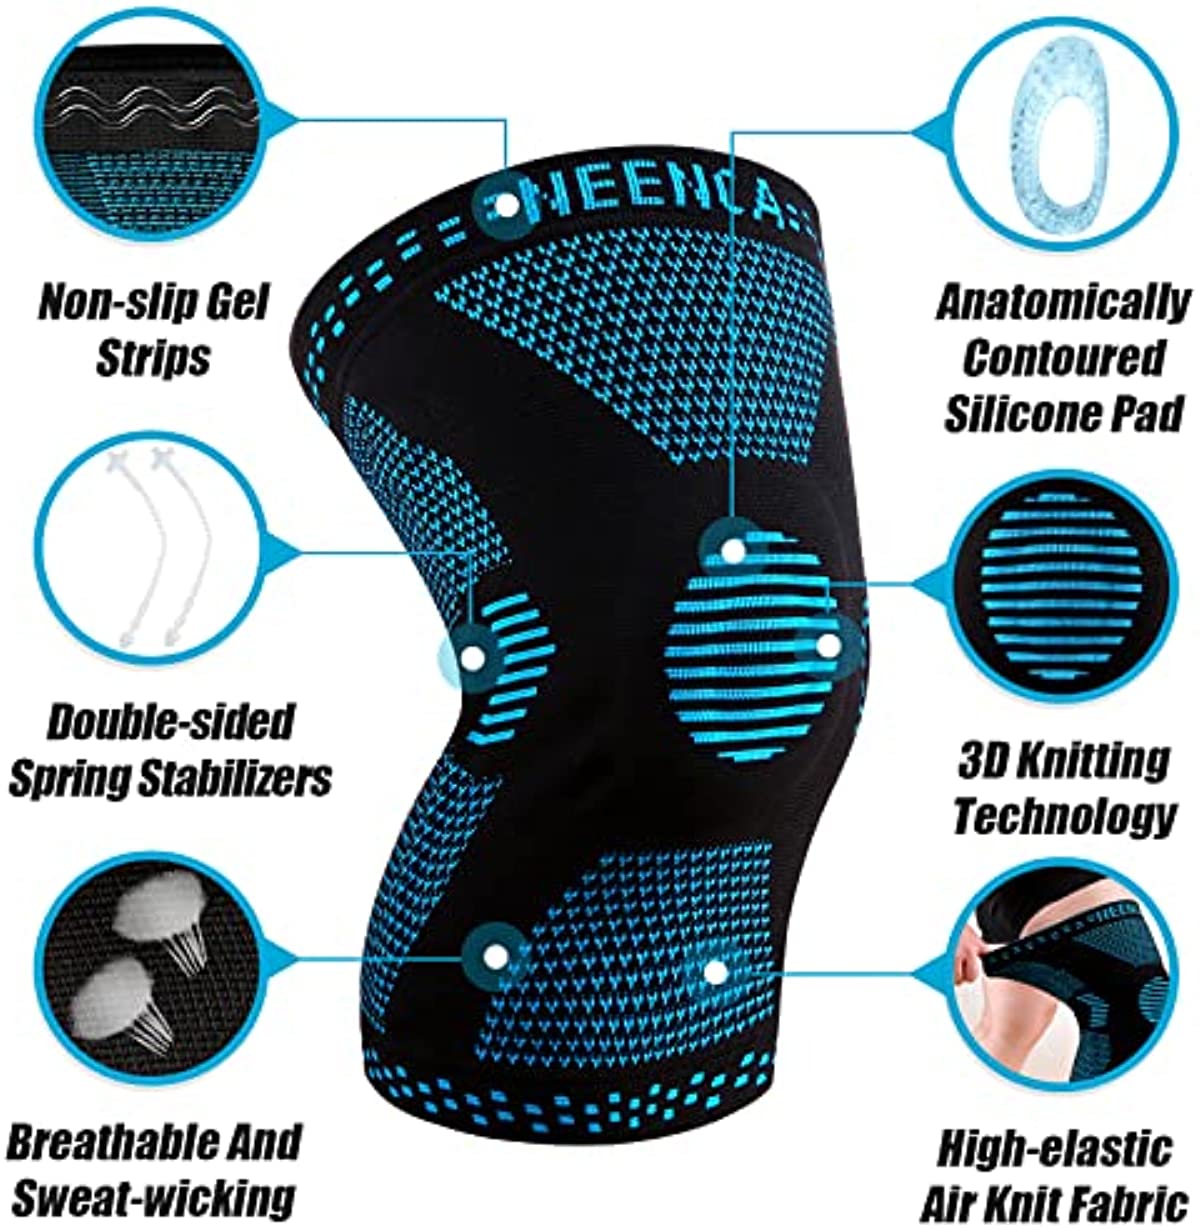 NEENCA Professional Plus Size Knee Brace, Knee Compression Sleeve for Larger Legs and Bigger Thighs, Medical Knee Support for Knee Pain Relief, Injury Recovery, Sports Protection, Single(2XL-5XL) (Blue, 2XL)